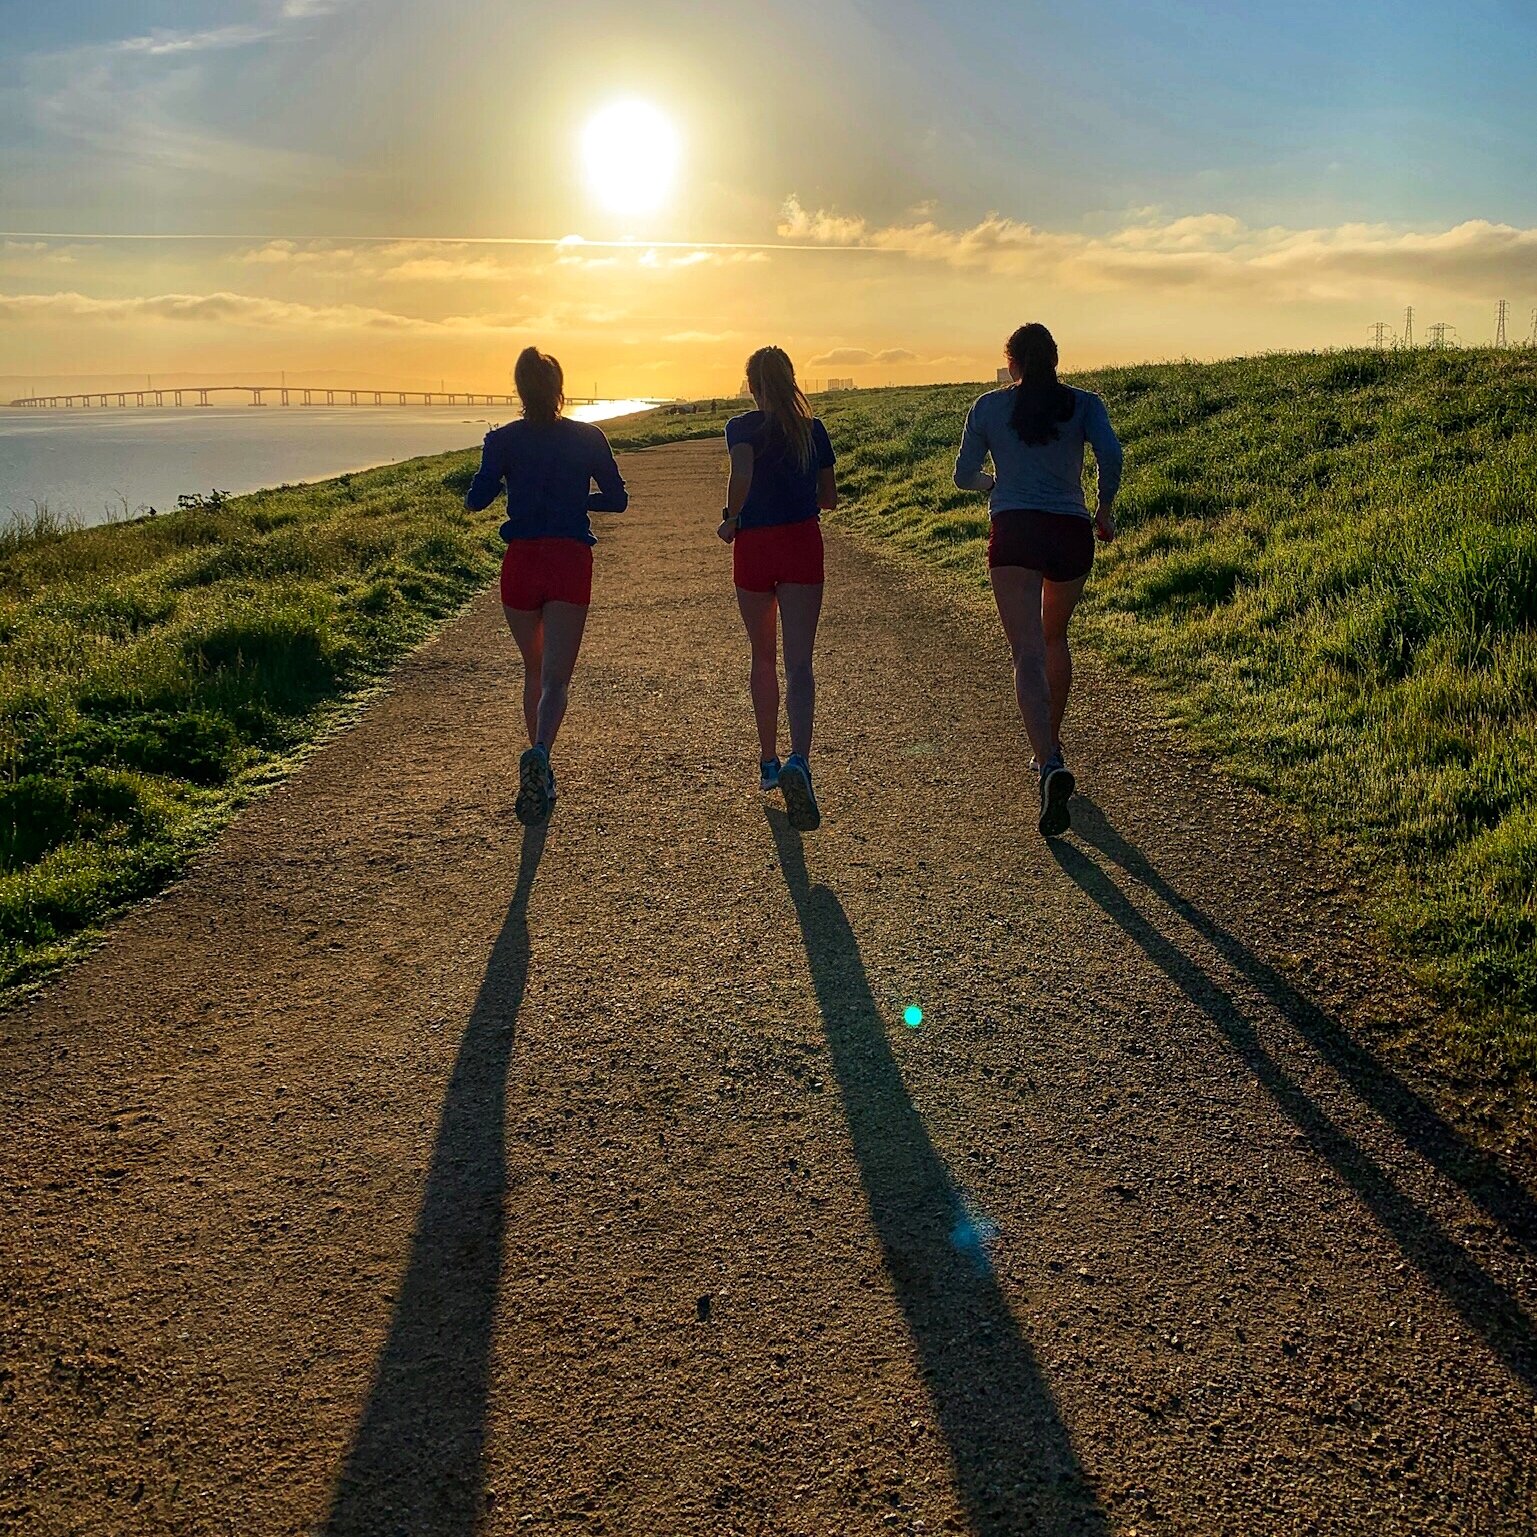 Image of the blog author and two other women running on a dirt path in the sun.